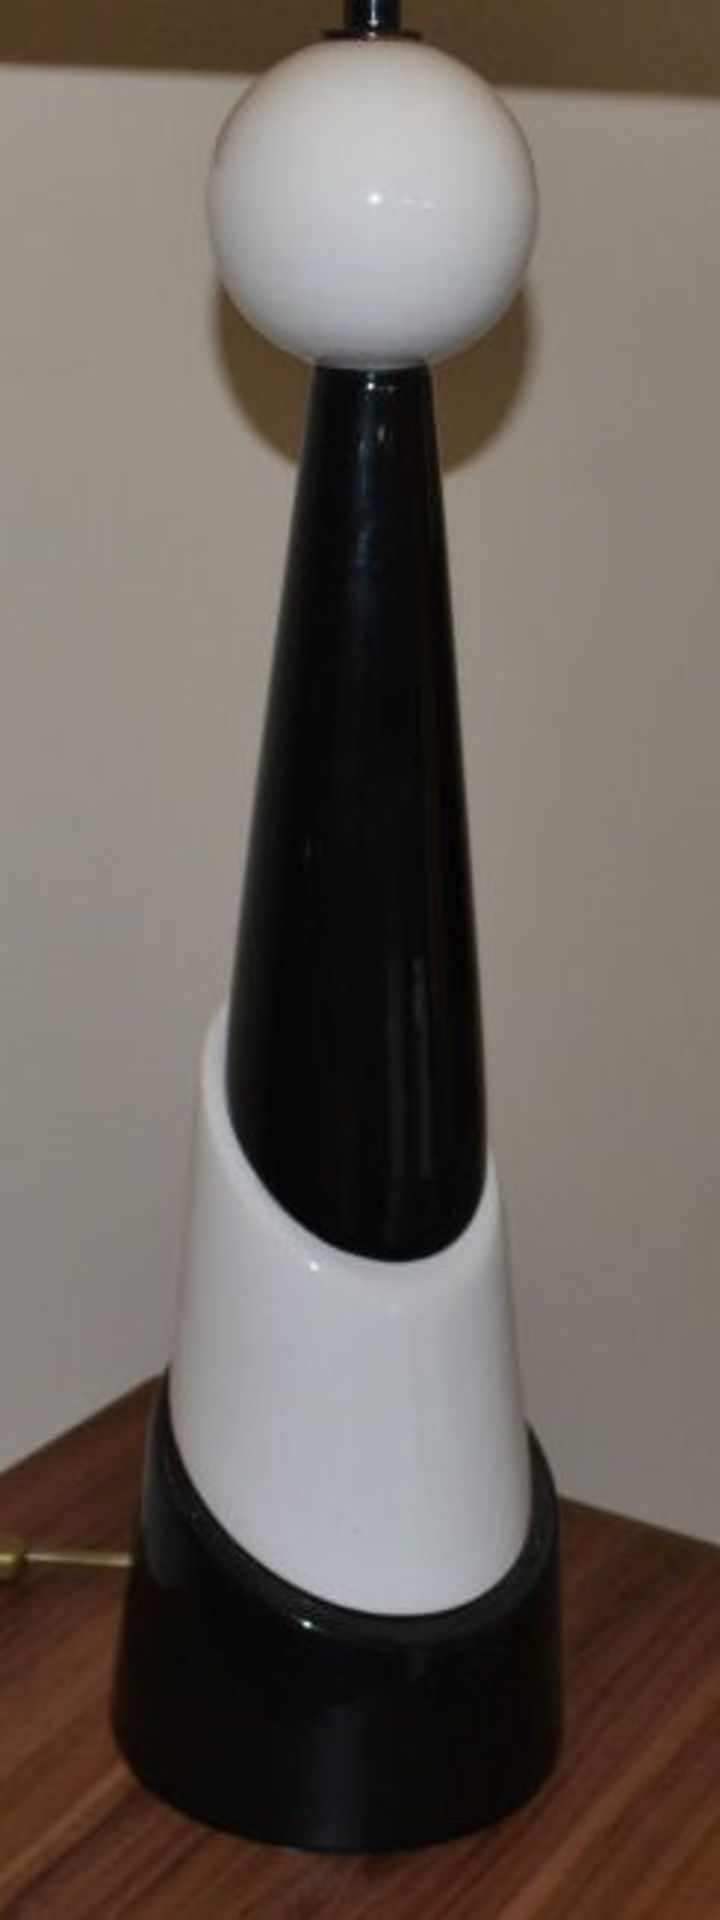 1 x Huge Lamp. 101cm Tall. Base Is Black And White Cone Design. - Image 3 of 5